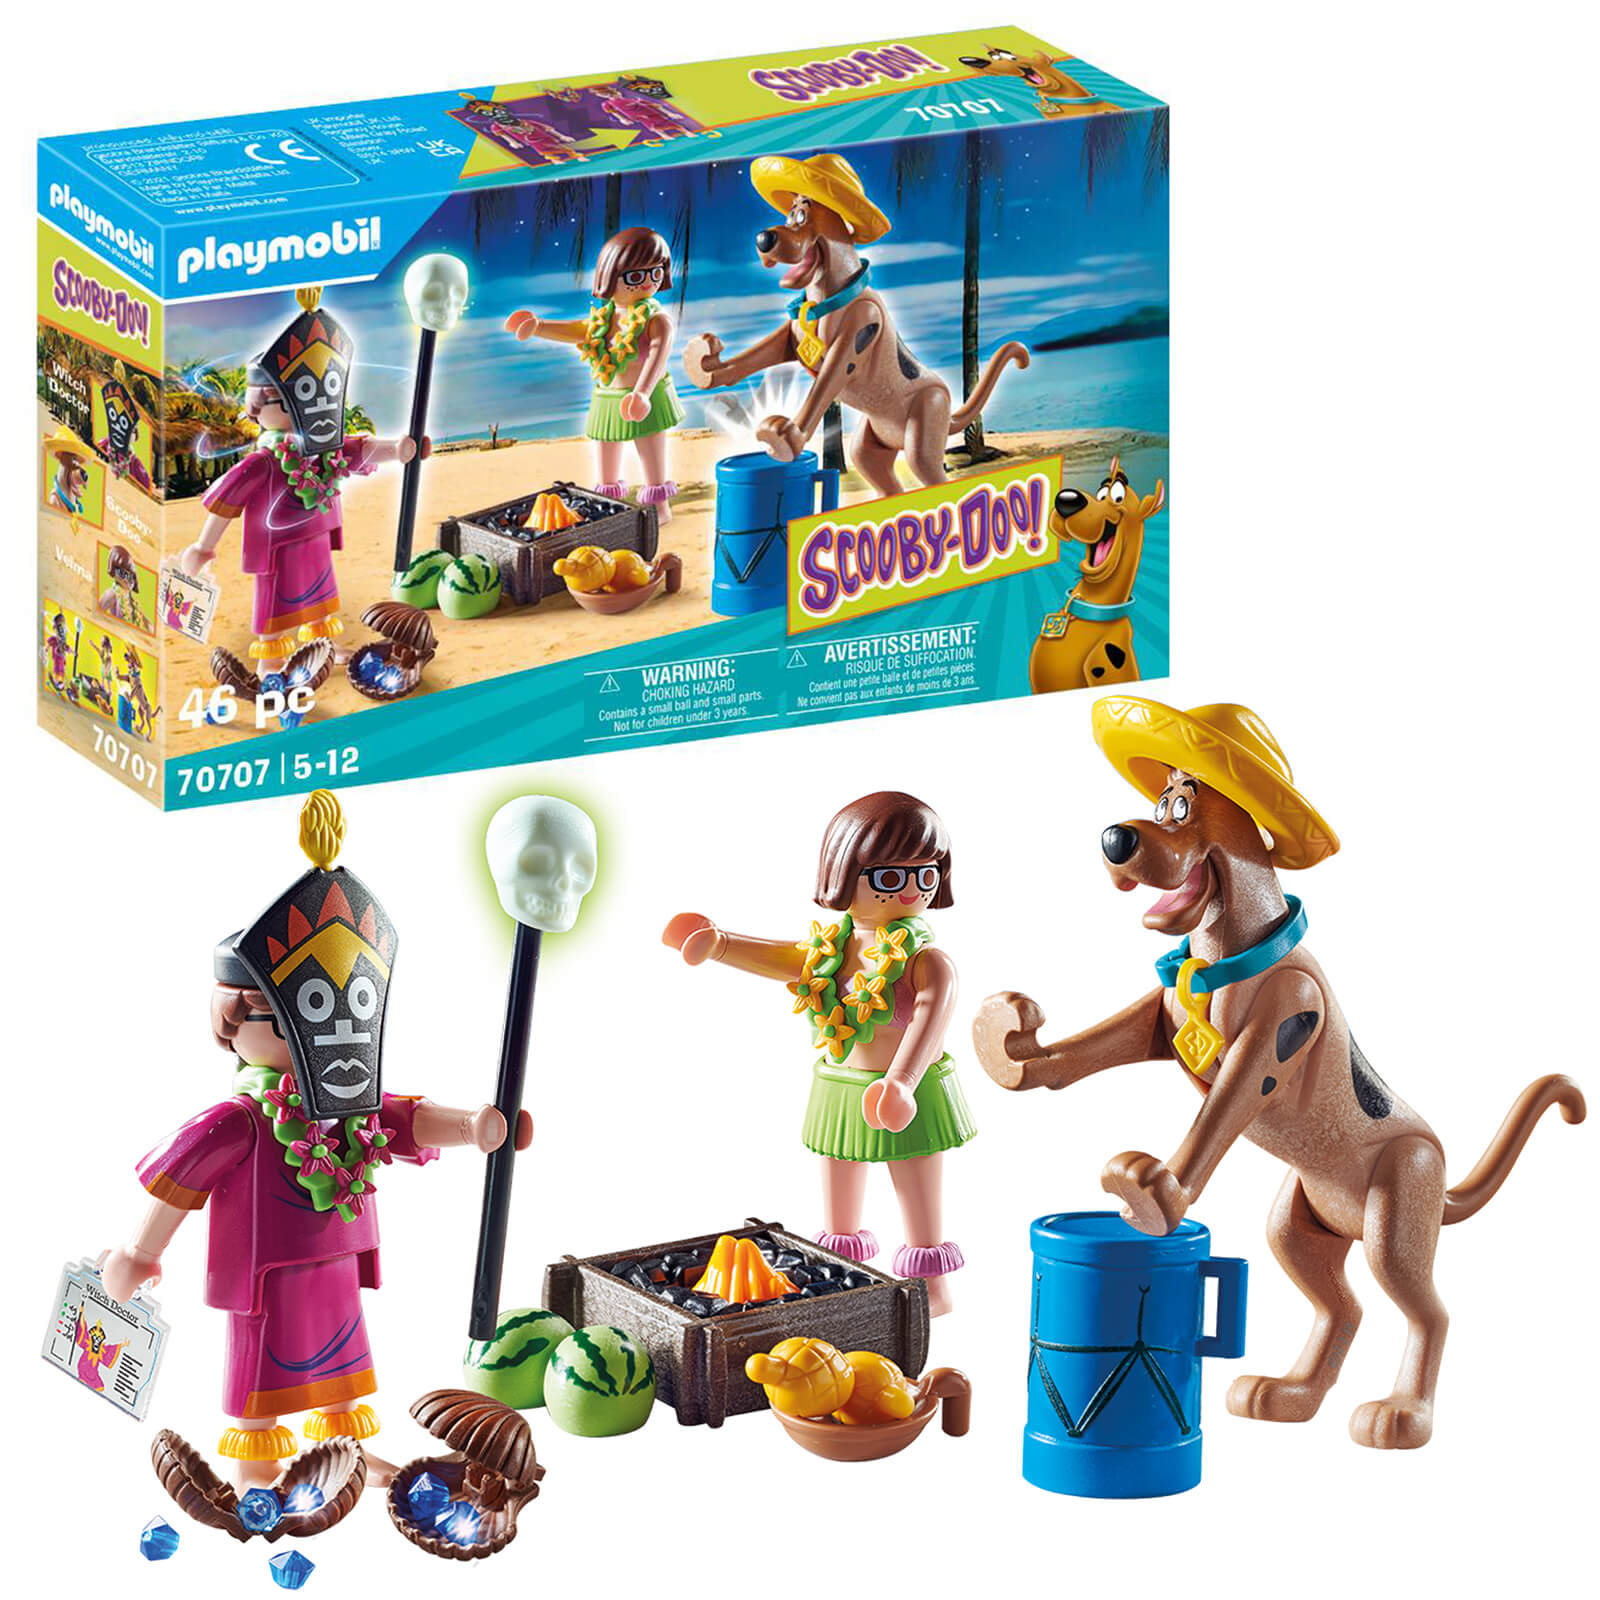 Playmobil SCOOBY DOO! Adventure With Witch Doctor (70707)